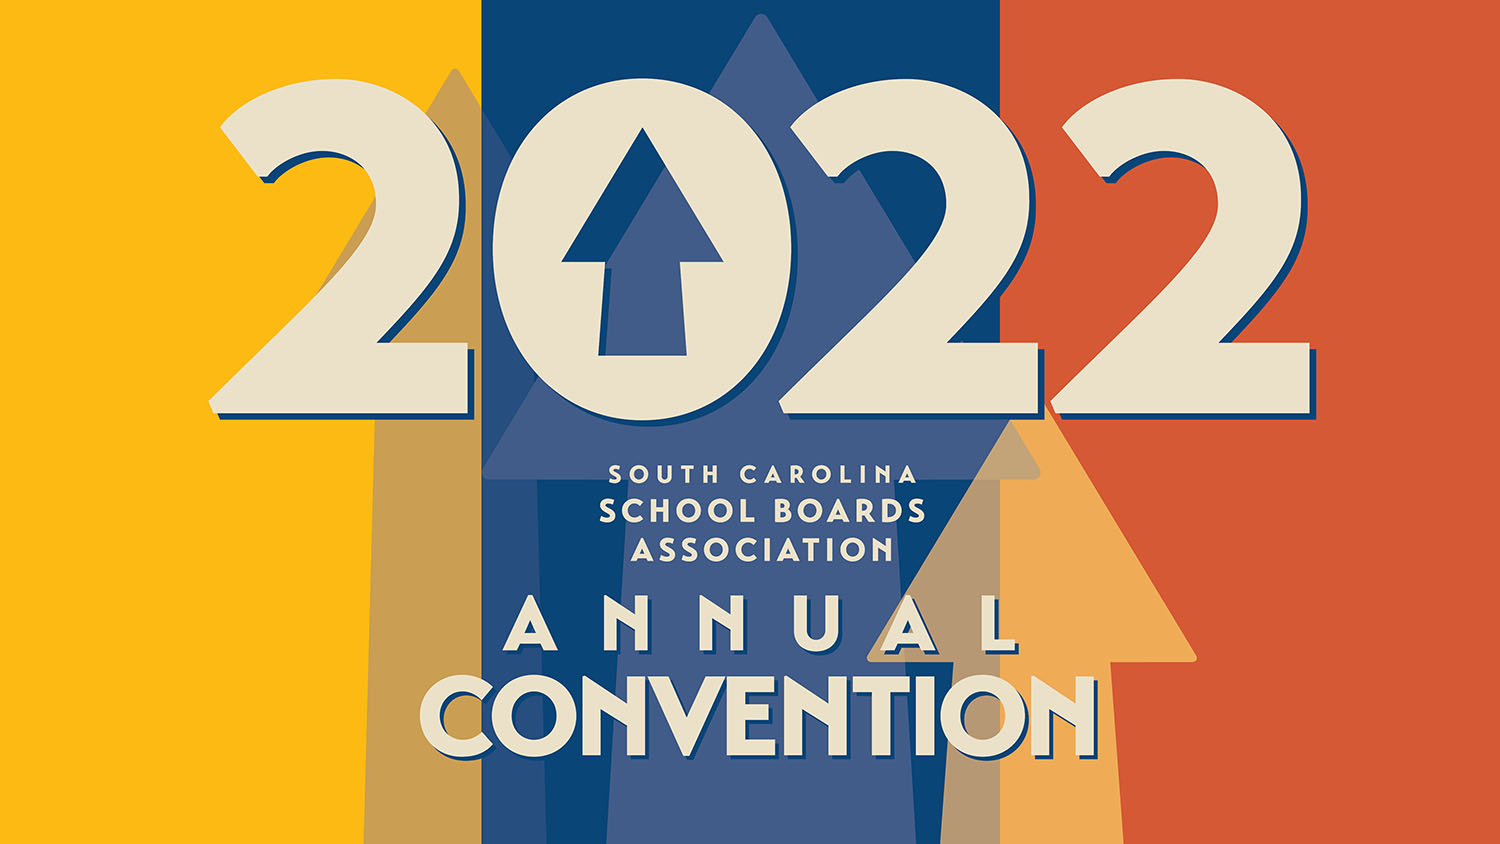 PUSD Board Members Attend SCSBA 2022 Annual Convention